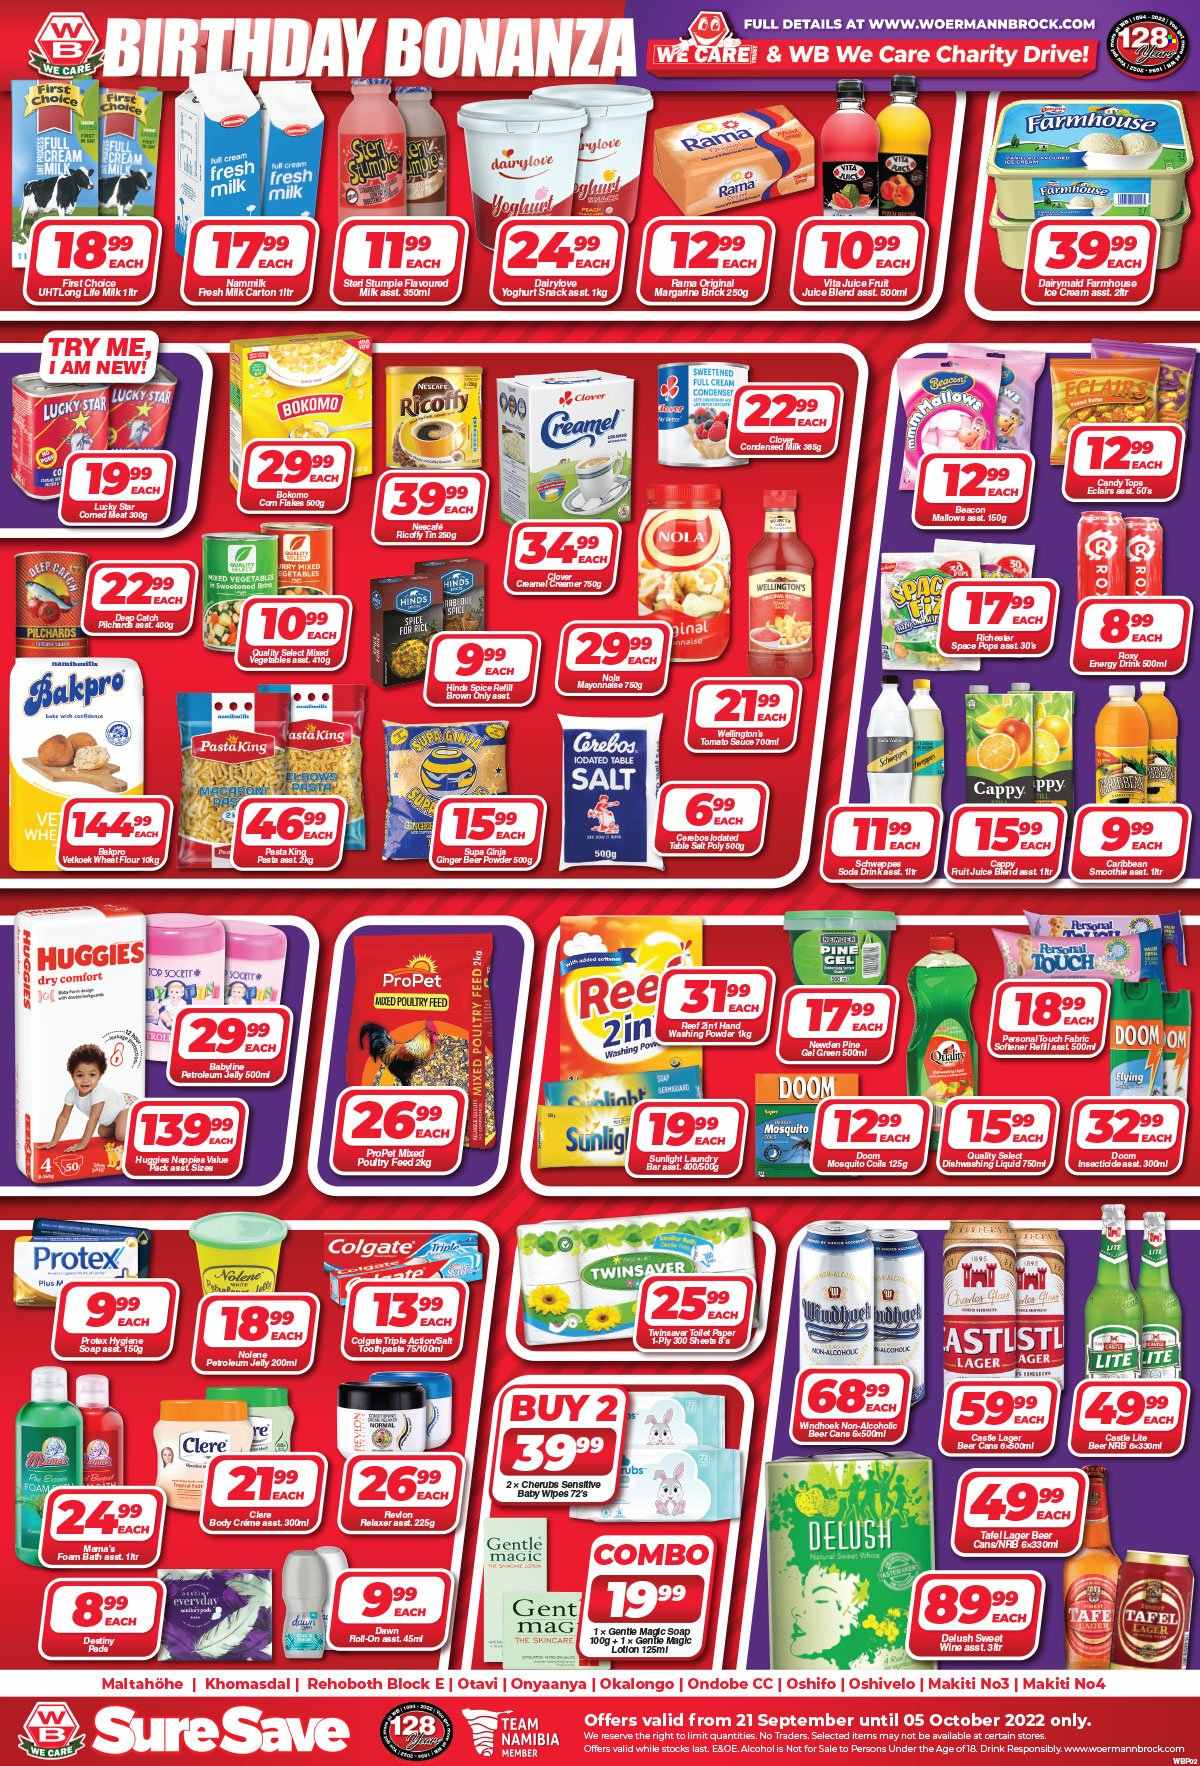 thumbnail - Woermann Brock catalogue  - 21/09/2022 - 05/10/2022 - Sales products - sardines, macaroni, pasta, sauce, yoghurt, Clover, flavoured milk, condensed milk, Steri Stumpie, margarine, Rama, creamer, mayonnaise, ice cream, mixed vegetables, marshmallows, snack, flour, wheat flour, tomato sauce, corned meat, corn flakes, spice, Hinds, Schweppes, energy drink, fruit juice, juice, smoothie, soda, Ricoffy, Nescafé, alcohol, beer, Castle, Lager, wipes, Huggies, baby wipes, nappies, toilet paper, fabric softener, softener refill, laundry powder, laundry soap bar, Sunlight, dishwashing liquid, bath foam, Protex, soap, Colgate, toothpaste, petroleum jelly, Gentle Magic, Revlon, relaxer, body lotion, Clere, Top Society, roll-on, ginger beer. Page 2.